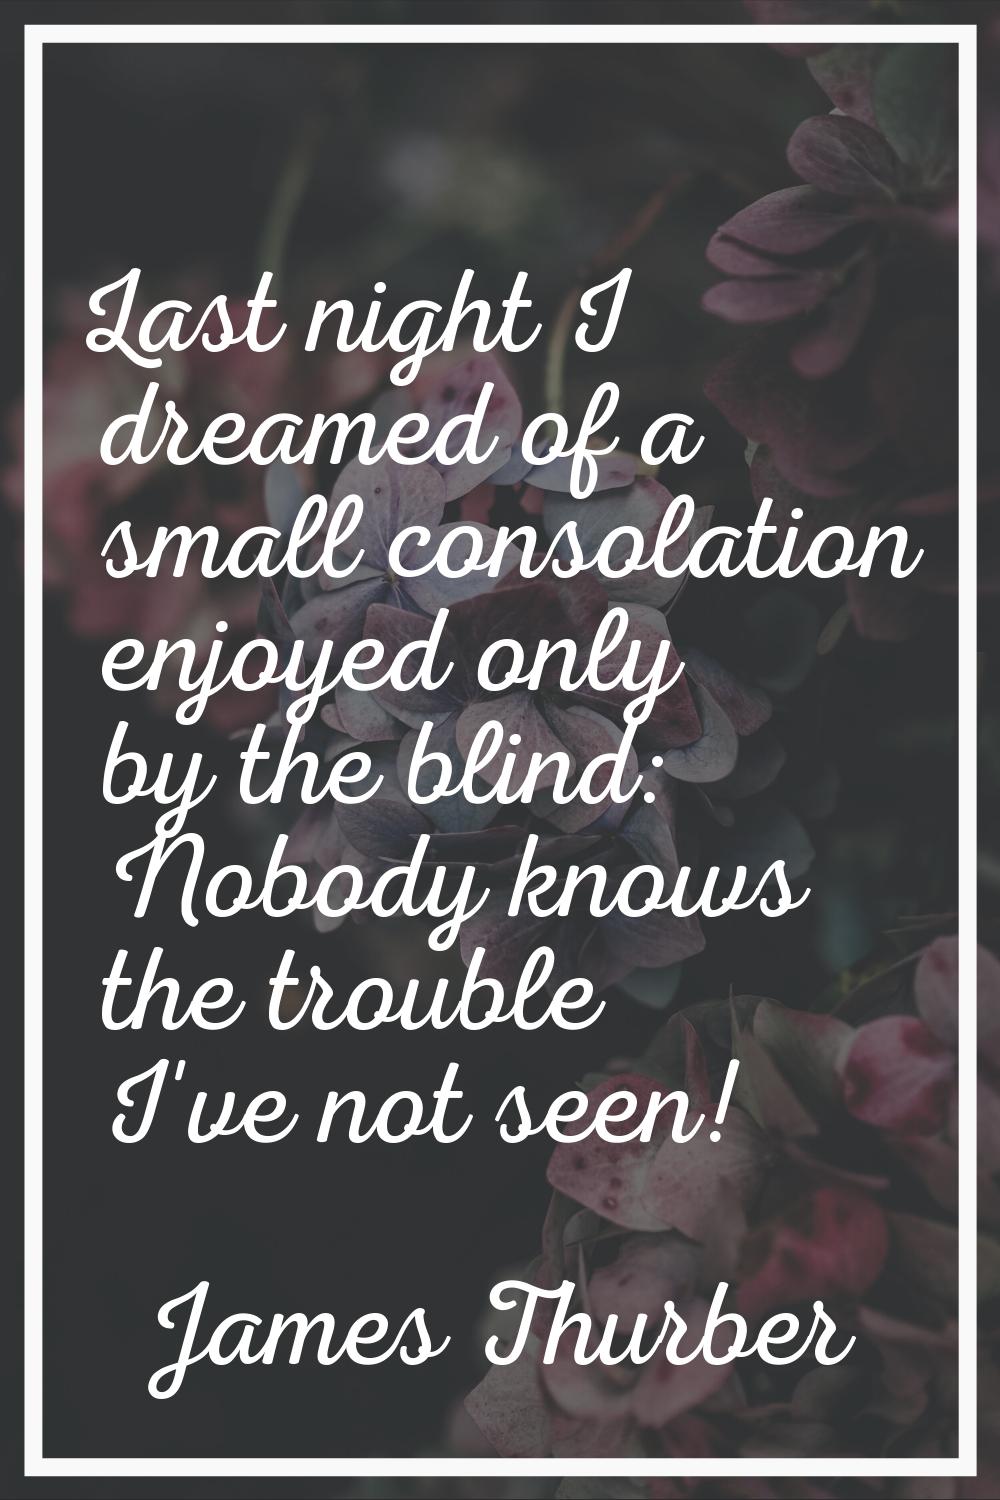 Last night I dreamed of a small consolation enjoyed only by the blind: Nobody knows the trouble I'v